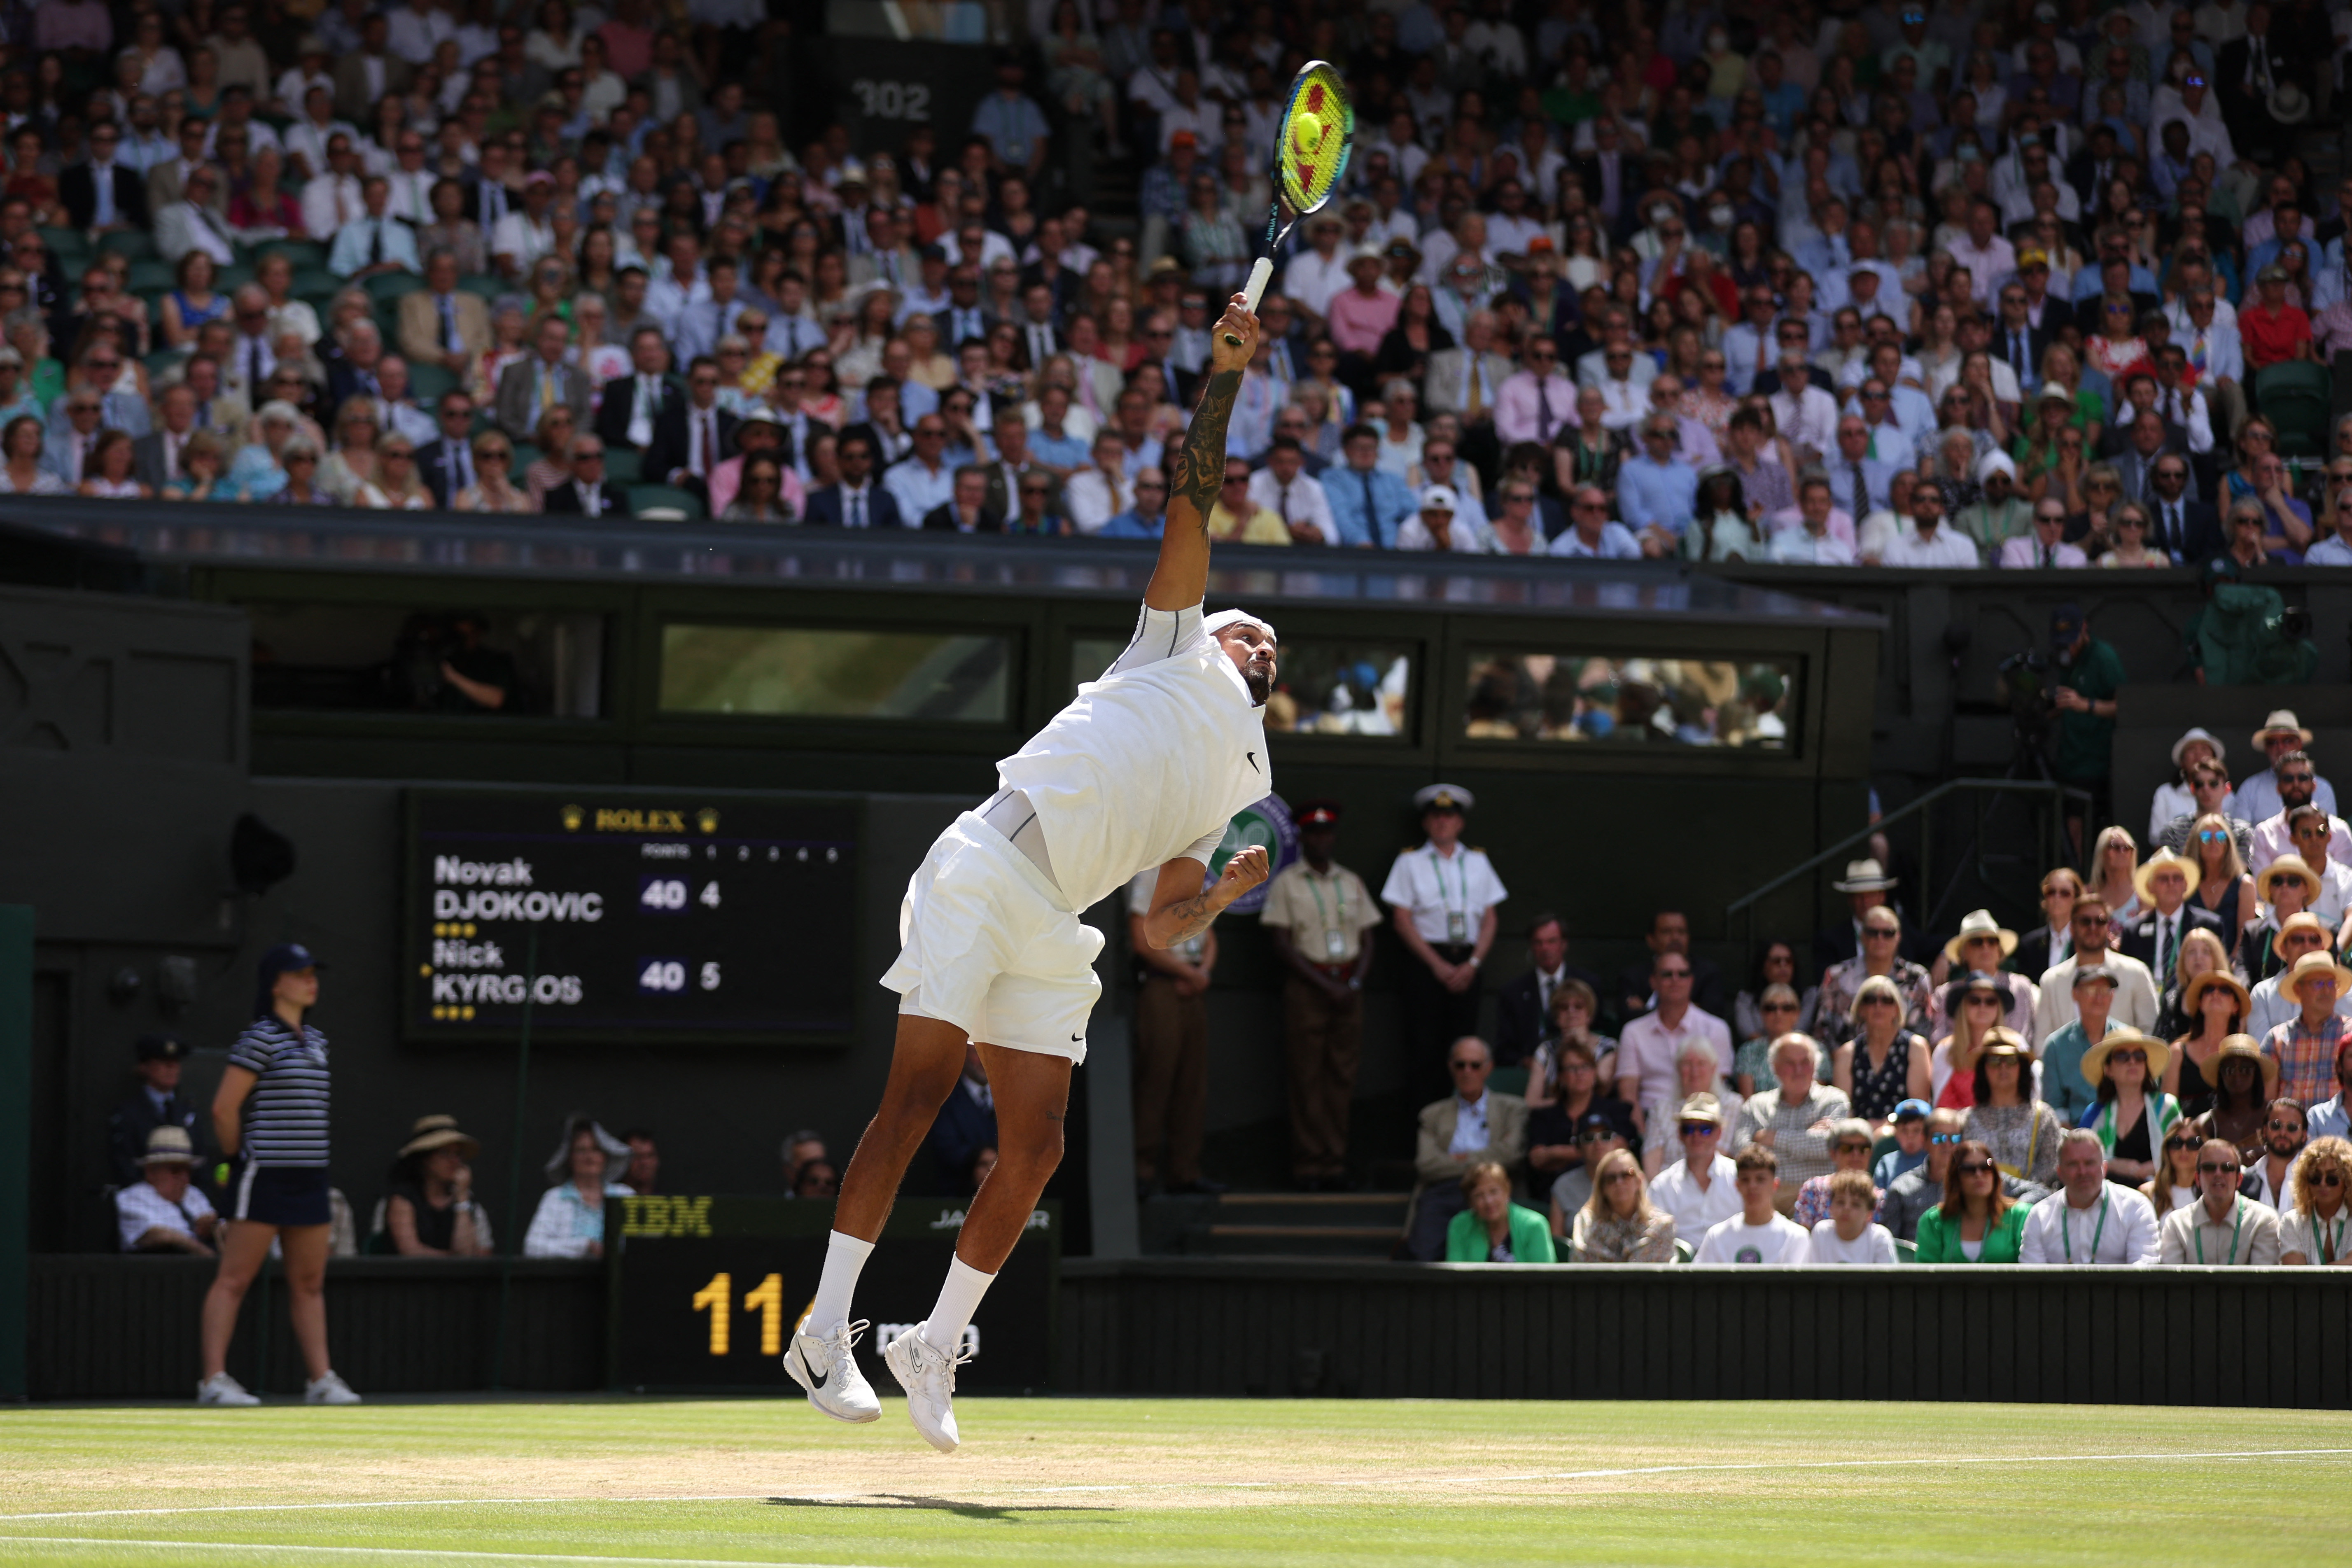 Tennis - Wimbledon - All England Lawn Tennis and Croquet Club, London, Britain - July 10, 2022 Australia's Nick Kyrgios in action during the men's singles final against Serbia's Novak Djokovic REUTERS/Matthew Childs